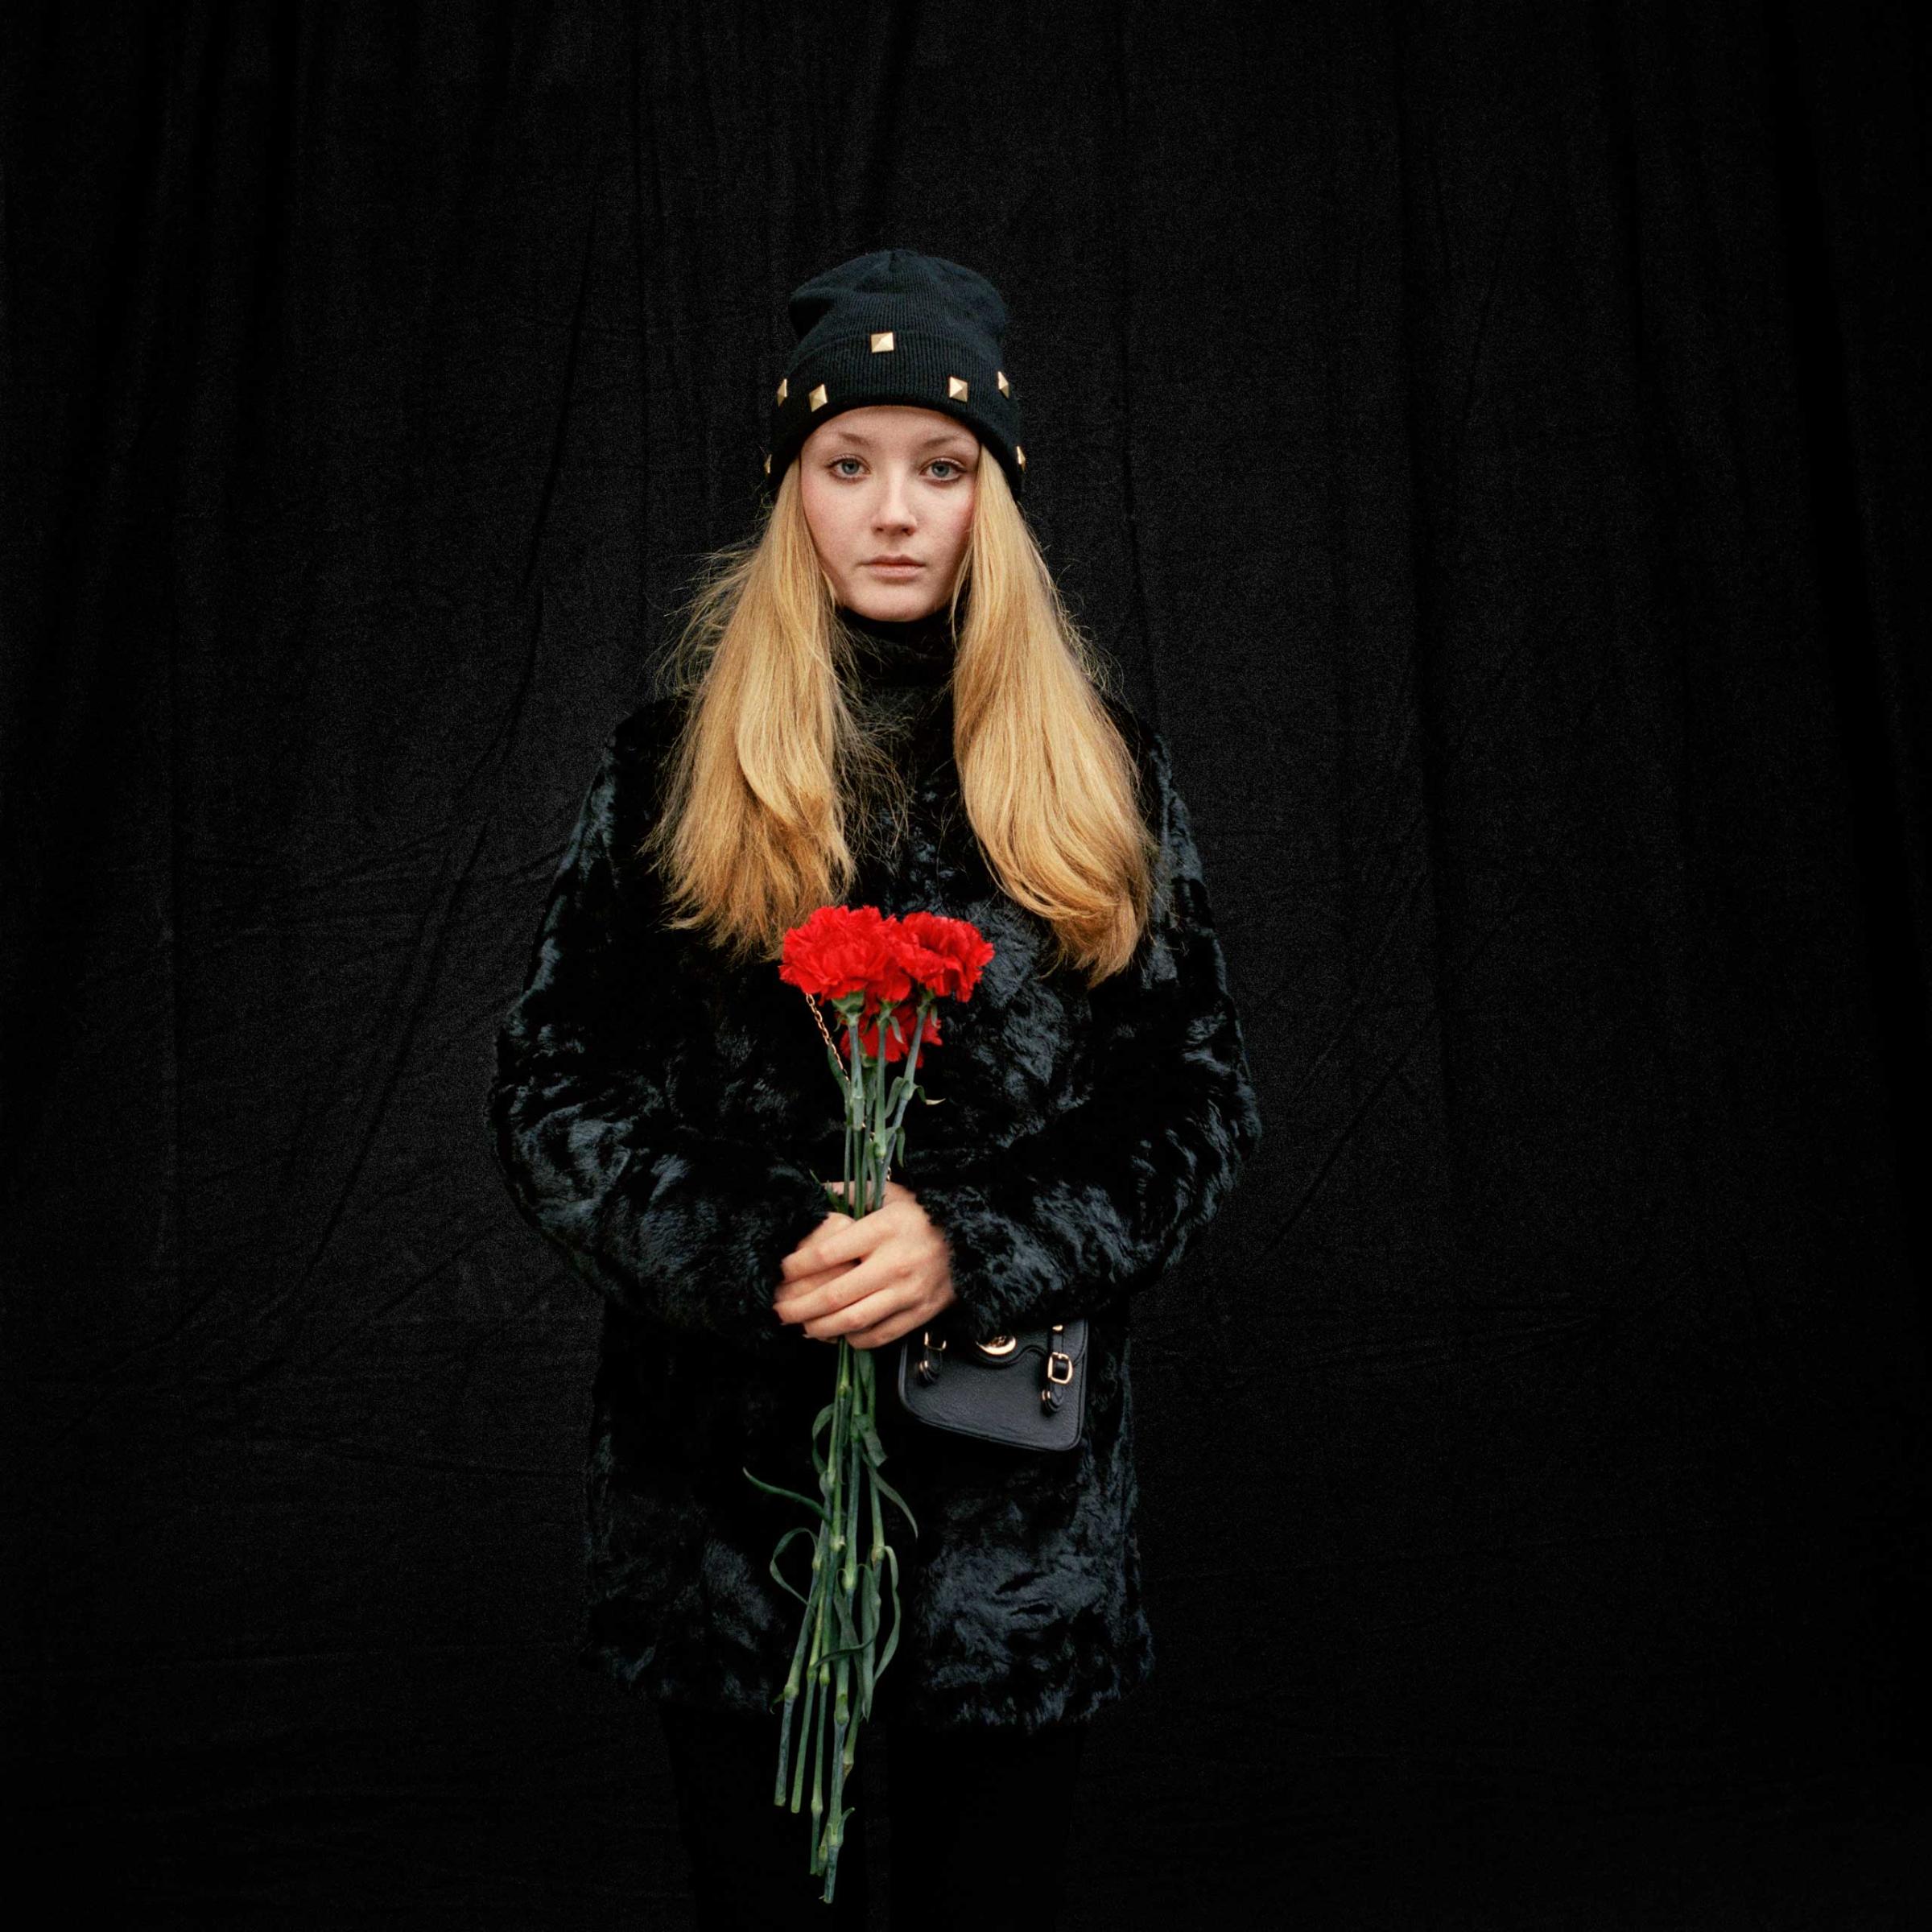 MAIDAN - Portraits from the Black Square